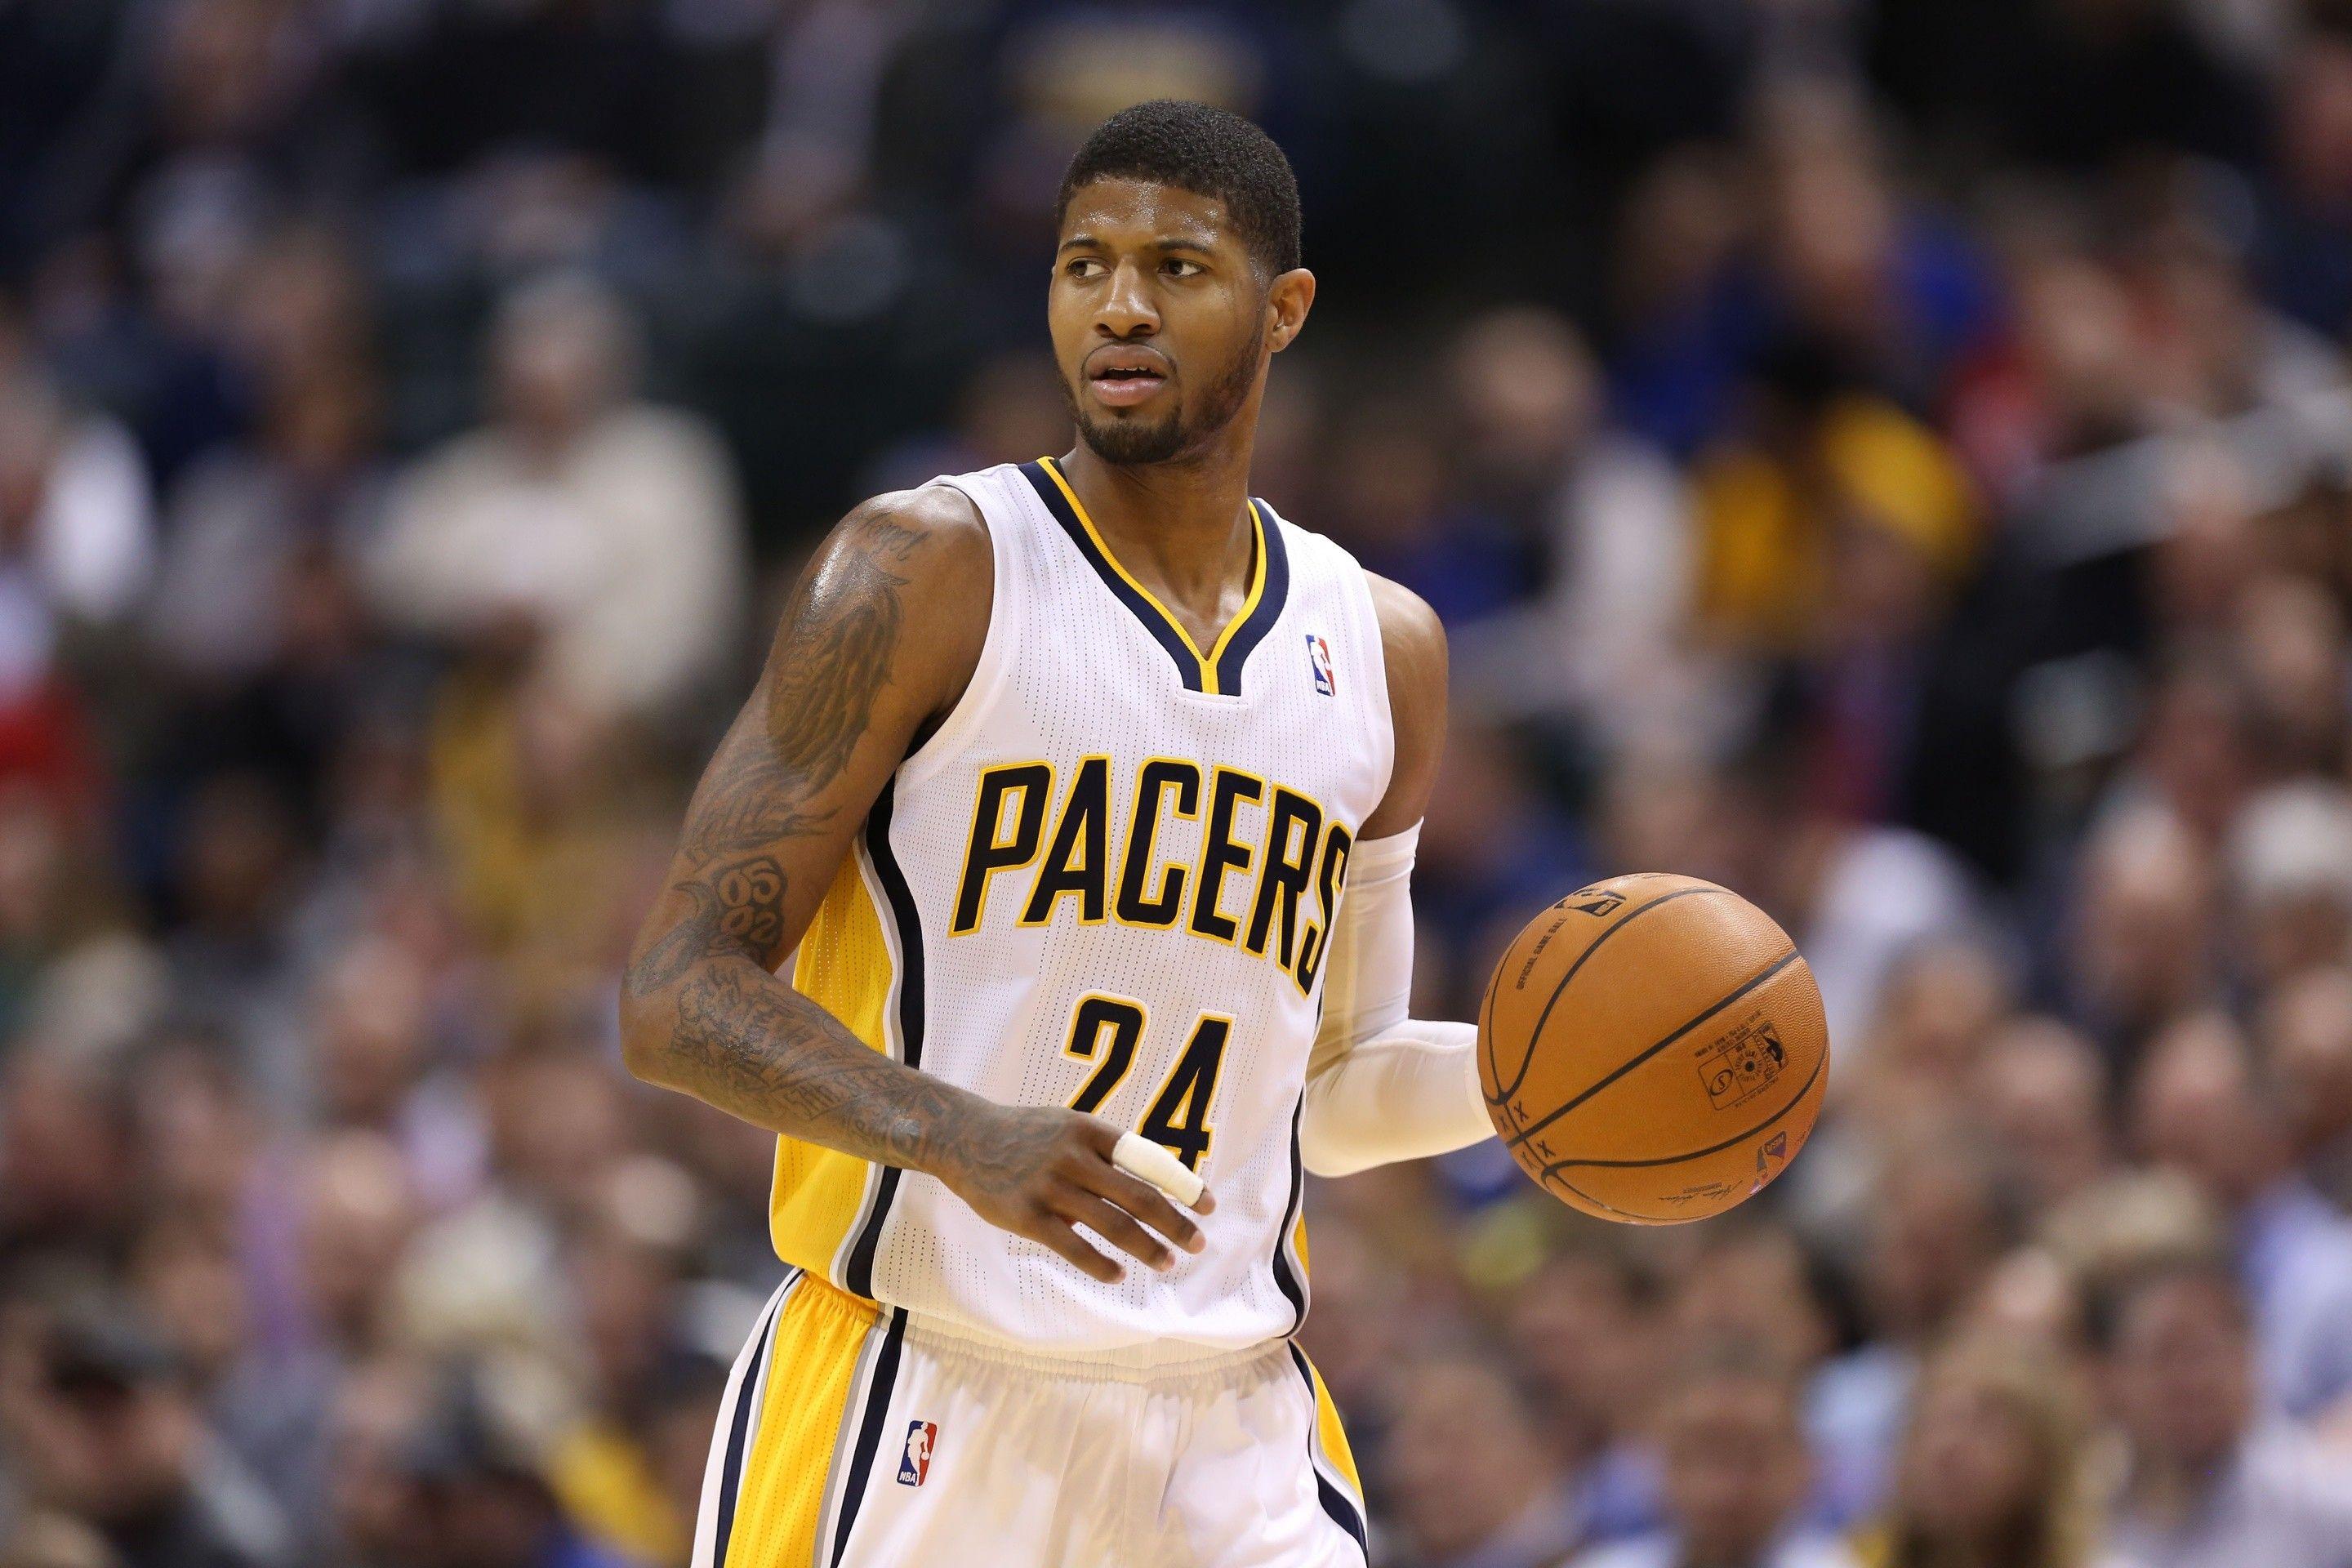 NBA, Basketball, Indiana Pacers, Paul George, Sports Wallpaper HD